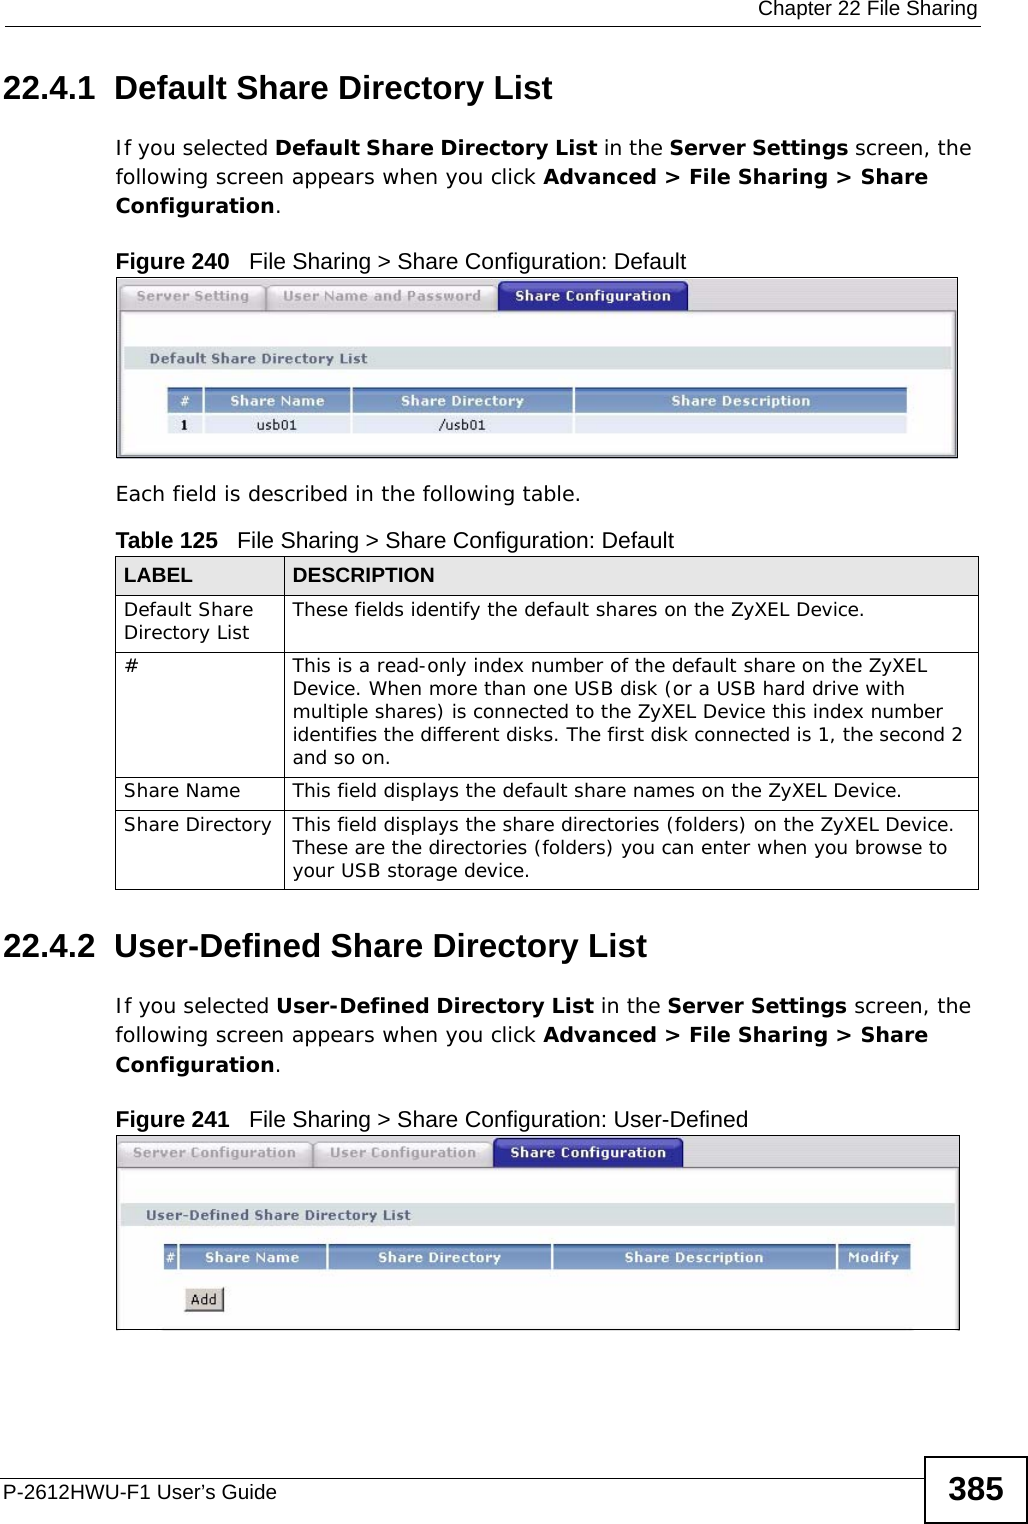  Chapter 22 File SharingP-2612HWU-F1 User’s Guide 38522.4.1  Default Share Directory List If you selected Default Share Directory List in the Server Settings screen, the following screen appears when you click Advanced &gt; File Sharing &gt; Share Configuration.Figure 240   File Sharing &gt; Share Configuration: Default Each field is described in the following table.22.4.2  User-Defined Share Directory ListIf you selected User-Defined Directory List in the Server Settings screen, the following screen appears when you click Advanced &gt; File Sharing &gt; Share Configuration.Figure 241   File Sharing &gt; Share Configuration: User-Defined Table 125   File Sharing &gt; Share Configuration: Default LABEL DESCRIPTIONDefault Share Directory List These fields identify the default shares on the ZyXEL Device.#This is a read-only index number of the default share on the ZyXEL Device. When more than one USB disk (or a USB hard drive with multiple shares) is connected to the ZyXEL Device this index number identifies the different disks. The first disk connected is 1, the second 2 and so on.Share Name This field displays the default share names on the ZyXEL Device. Share Directory This field displays the share directories (folders) on the ZyXEL Device. These are the directories (folders) you can enter when you browse to your USB storage device. 